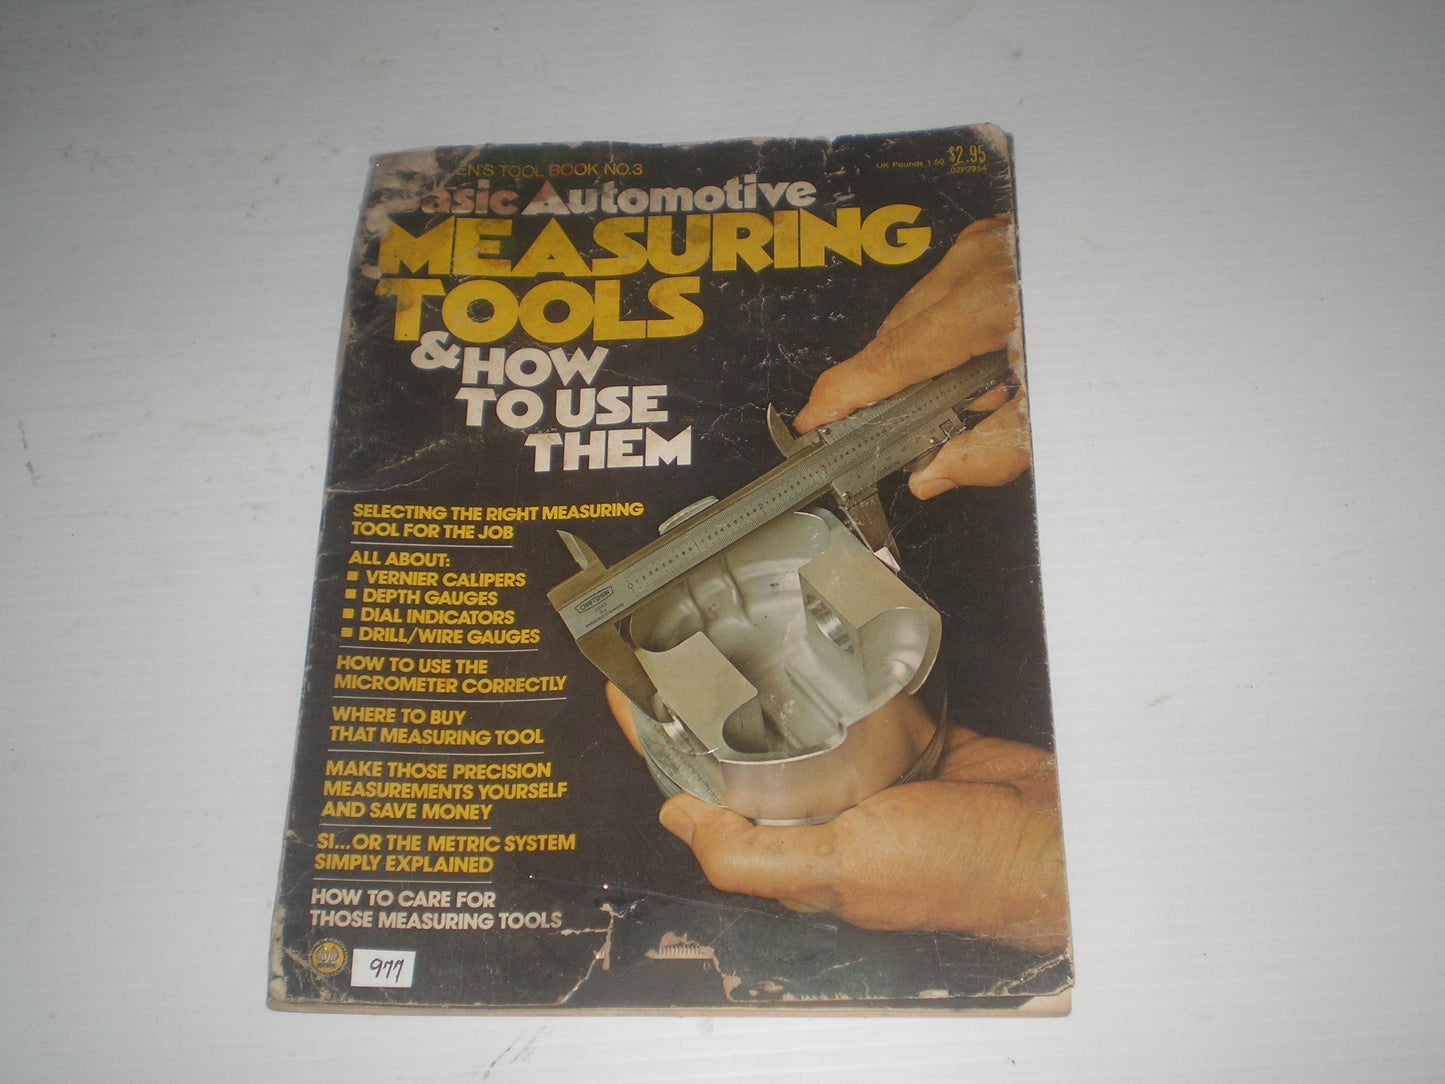 Basic Automotive Measuring Tools & How to Use Them  Petersen's Tool Book No.3  02P2954  #977